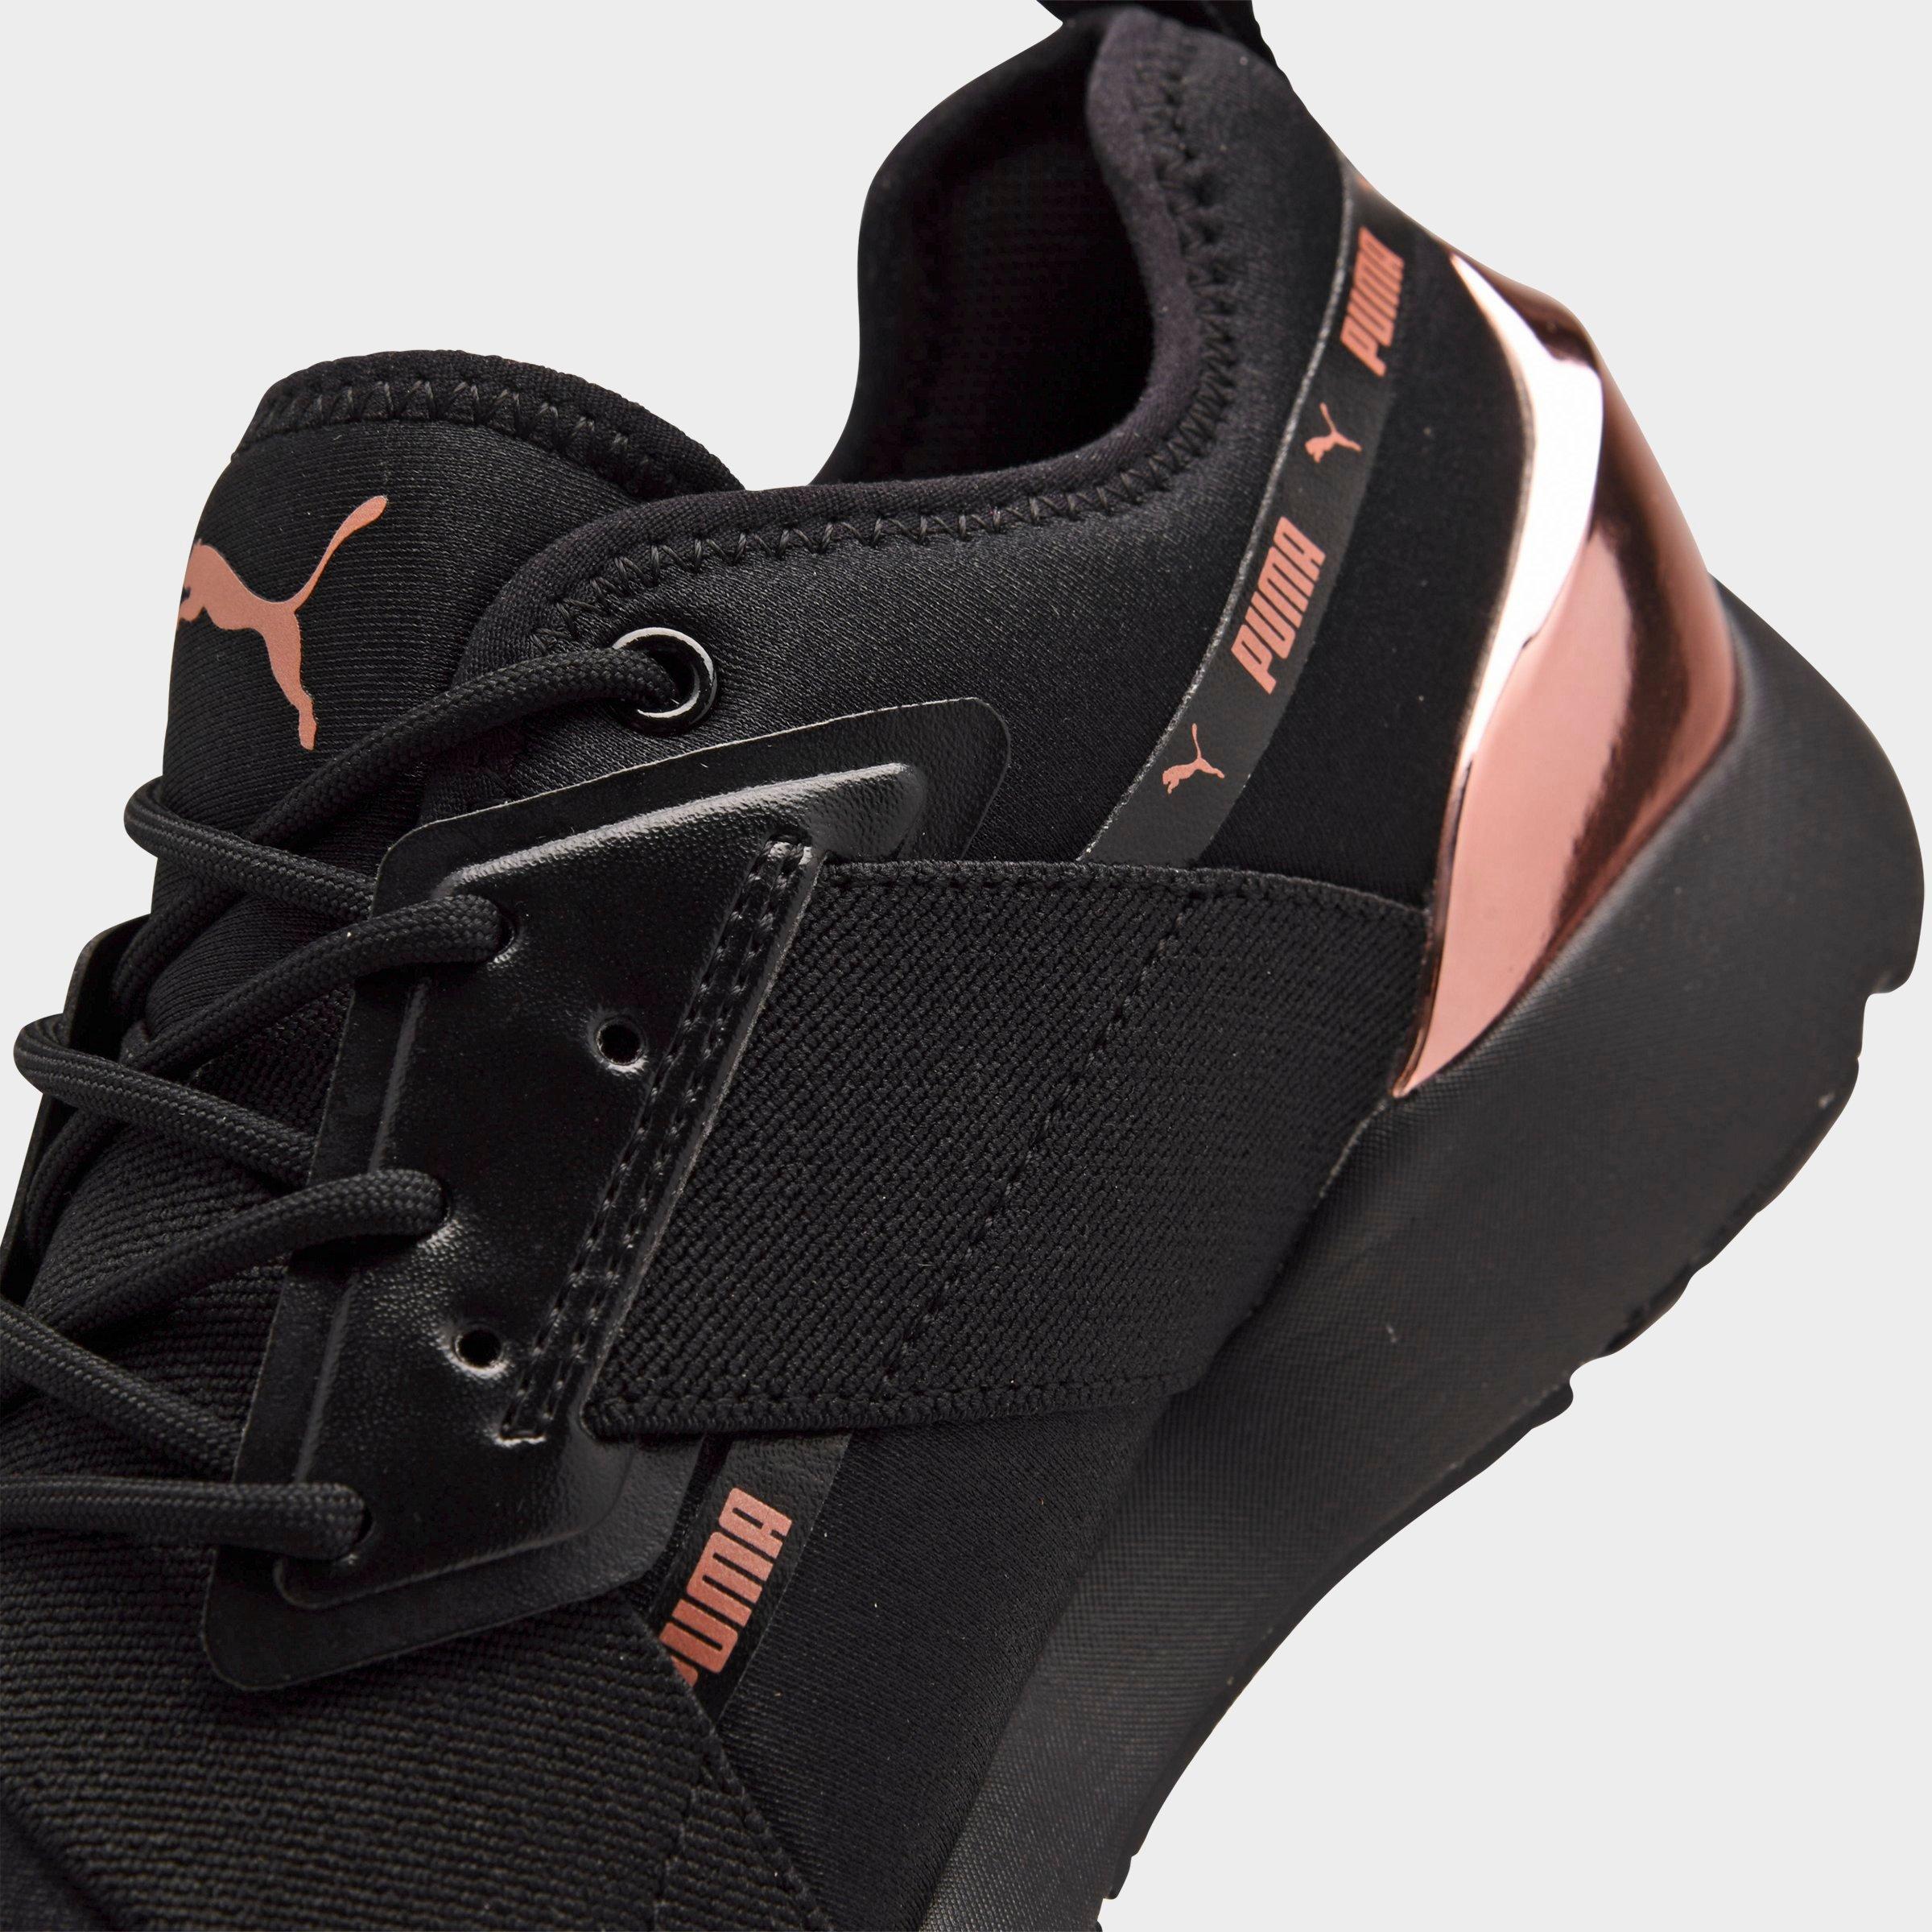 black and rose gold puma muse